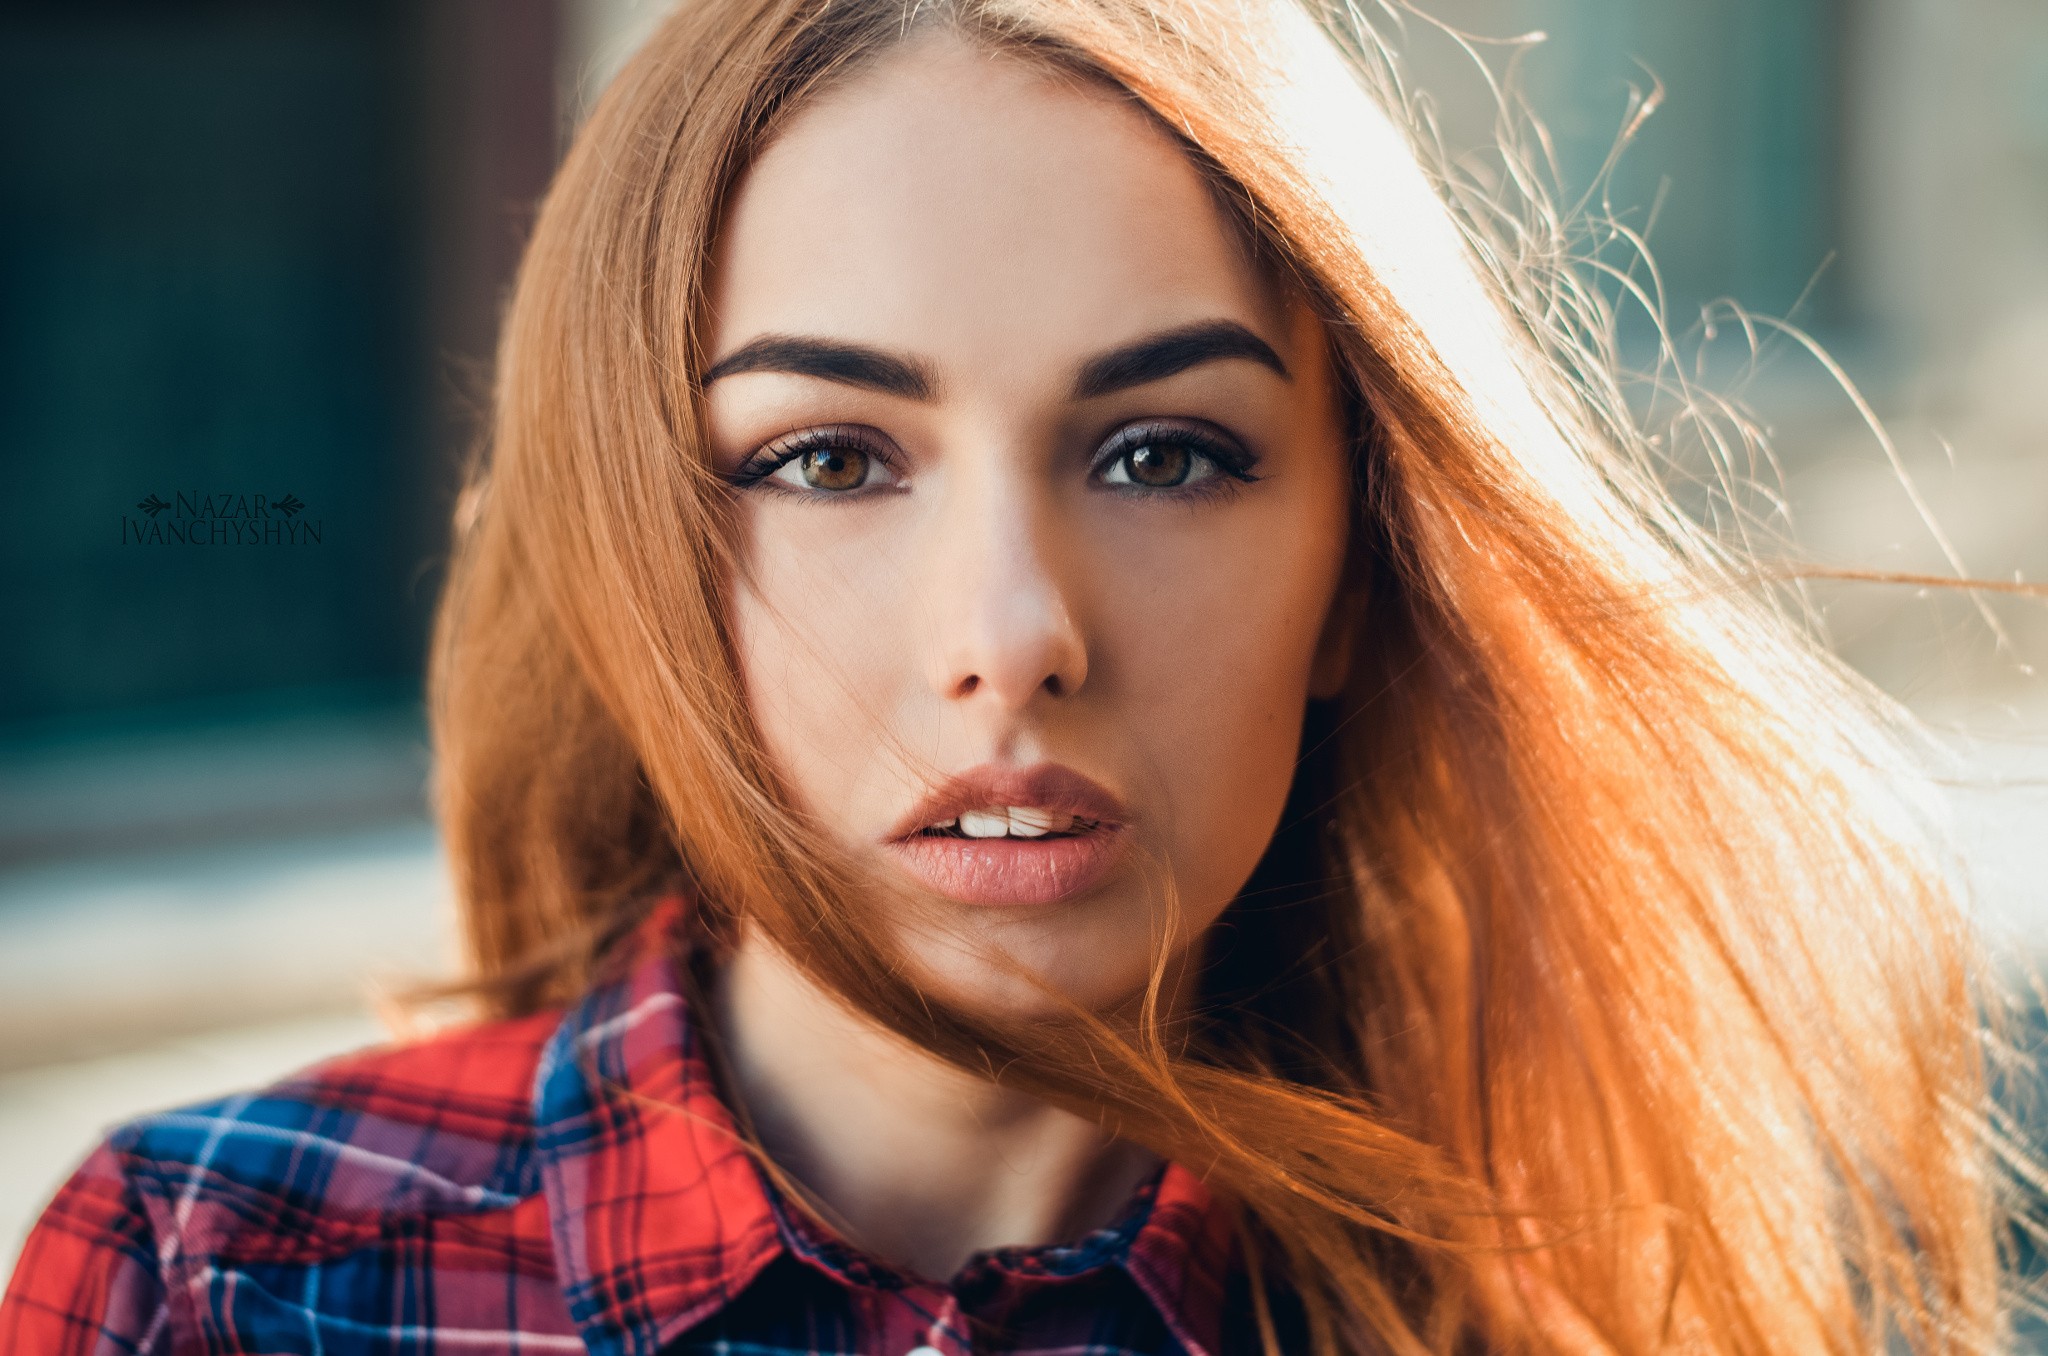 People 2048x1356 women model face portrait redhead Olya looking at viewer plaid shirt brown eyes shirt open mouth pink lipstick windy hair in face closeup Nazar Ivanchyshyn